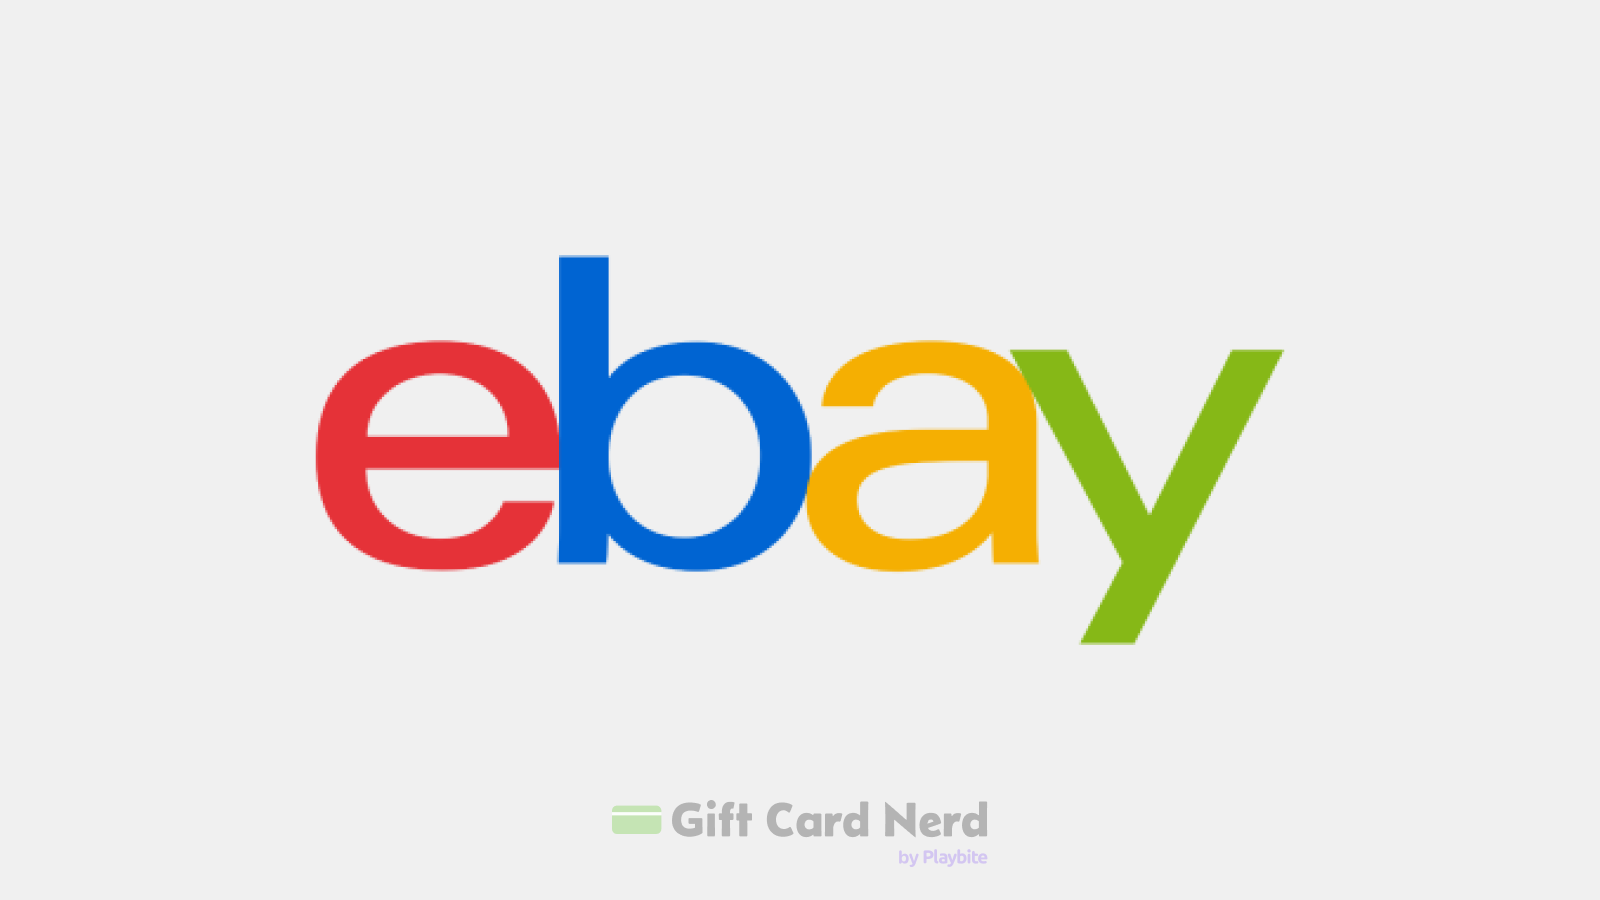 How to Check Your eBay Gift Card Balance